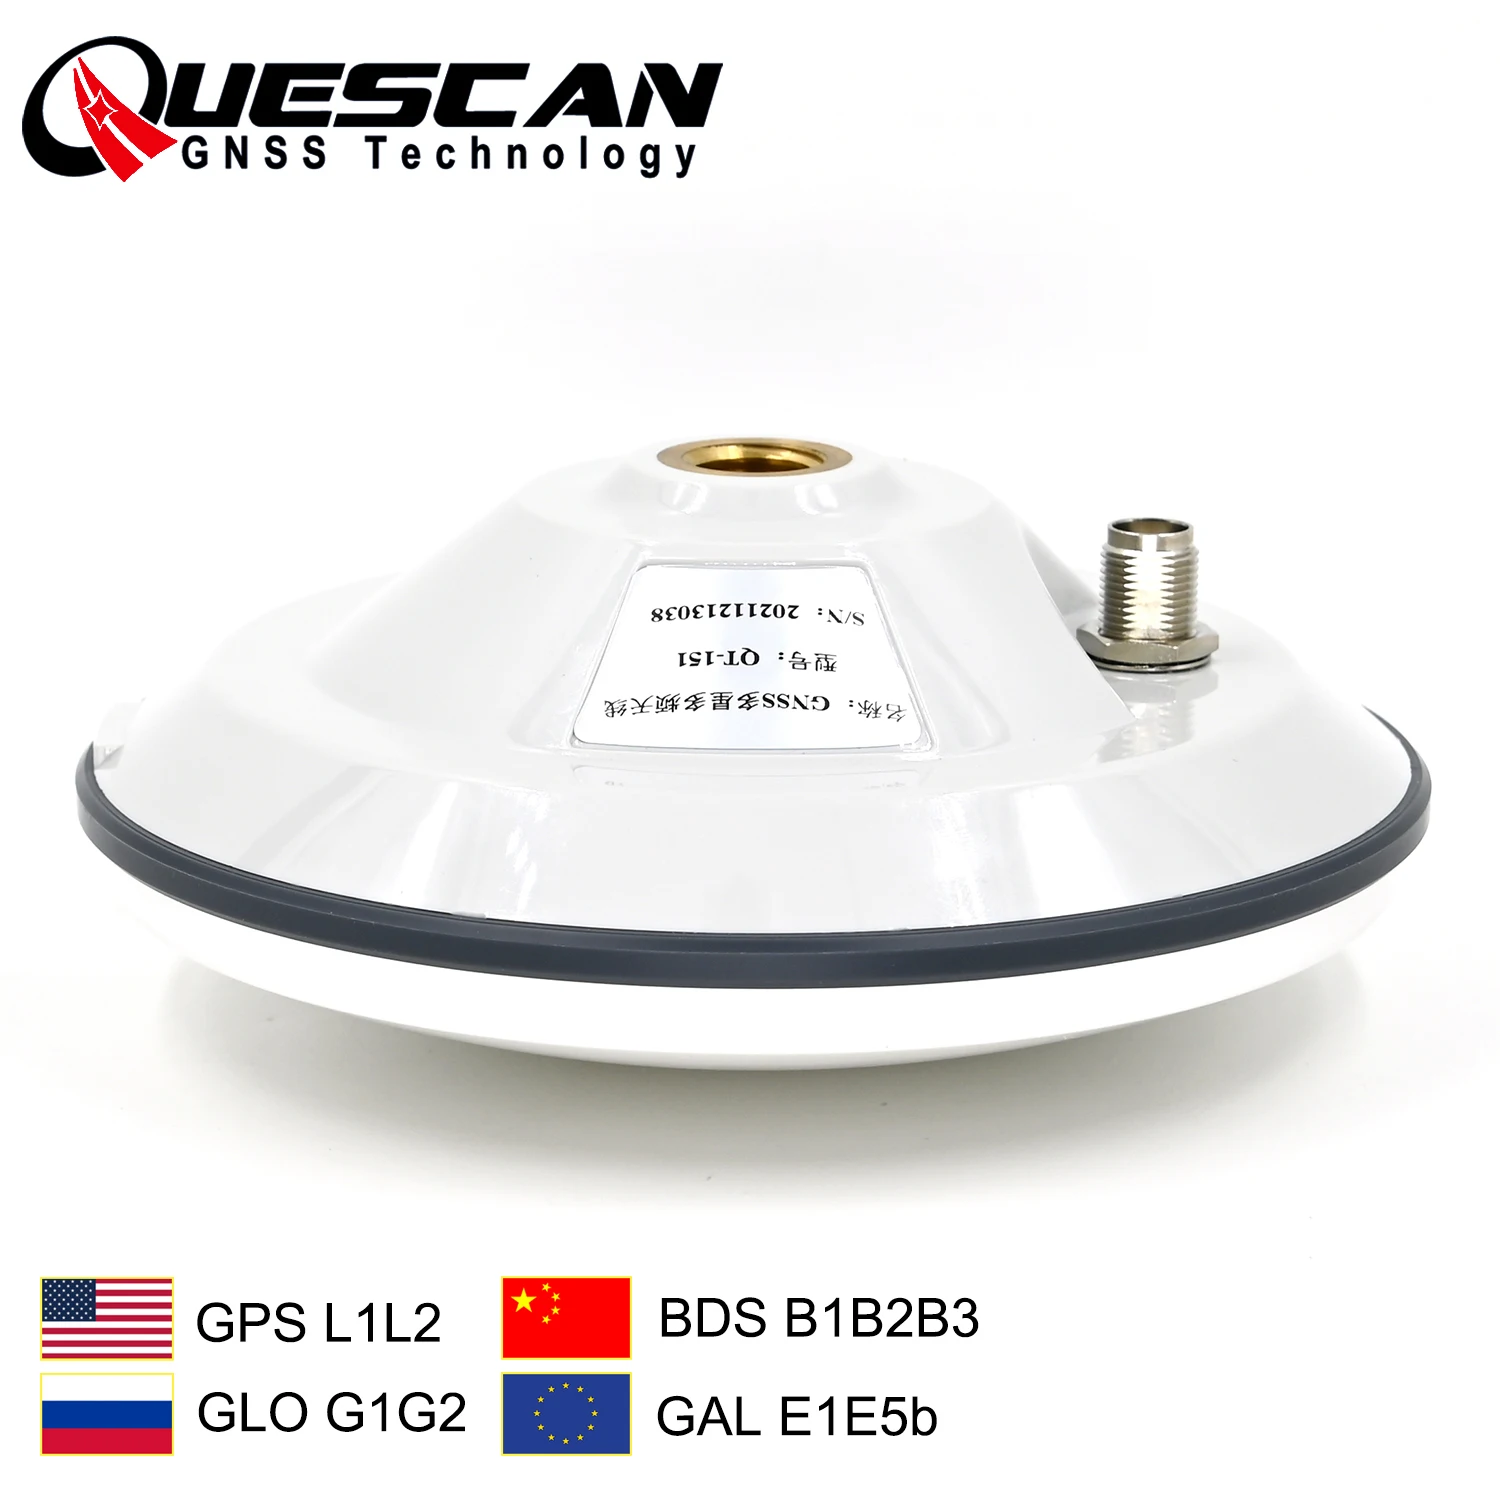 

QUESCAN High-precision Multi-band GNSS Antenna for Agricultural Autopilot Geodetic Survey RTK Antenna GPS GLONASS Beidou Galileo